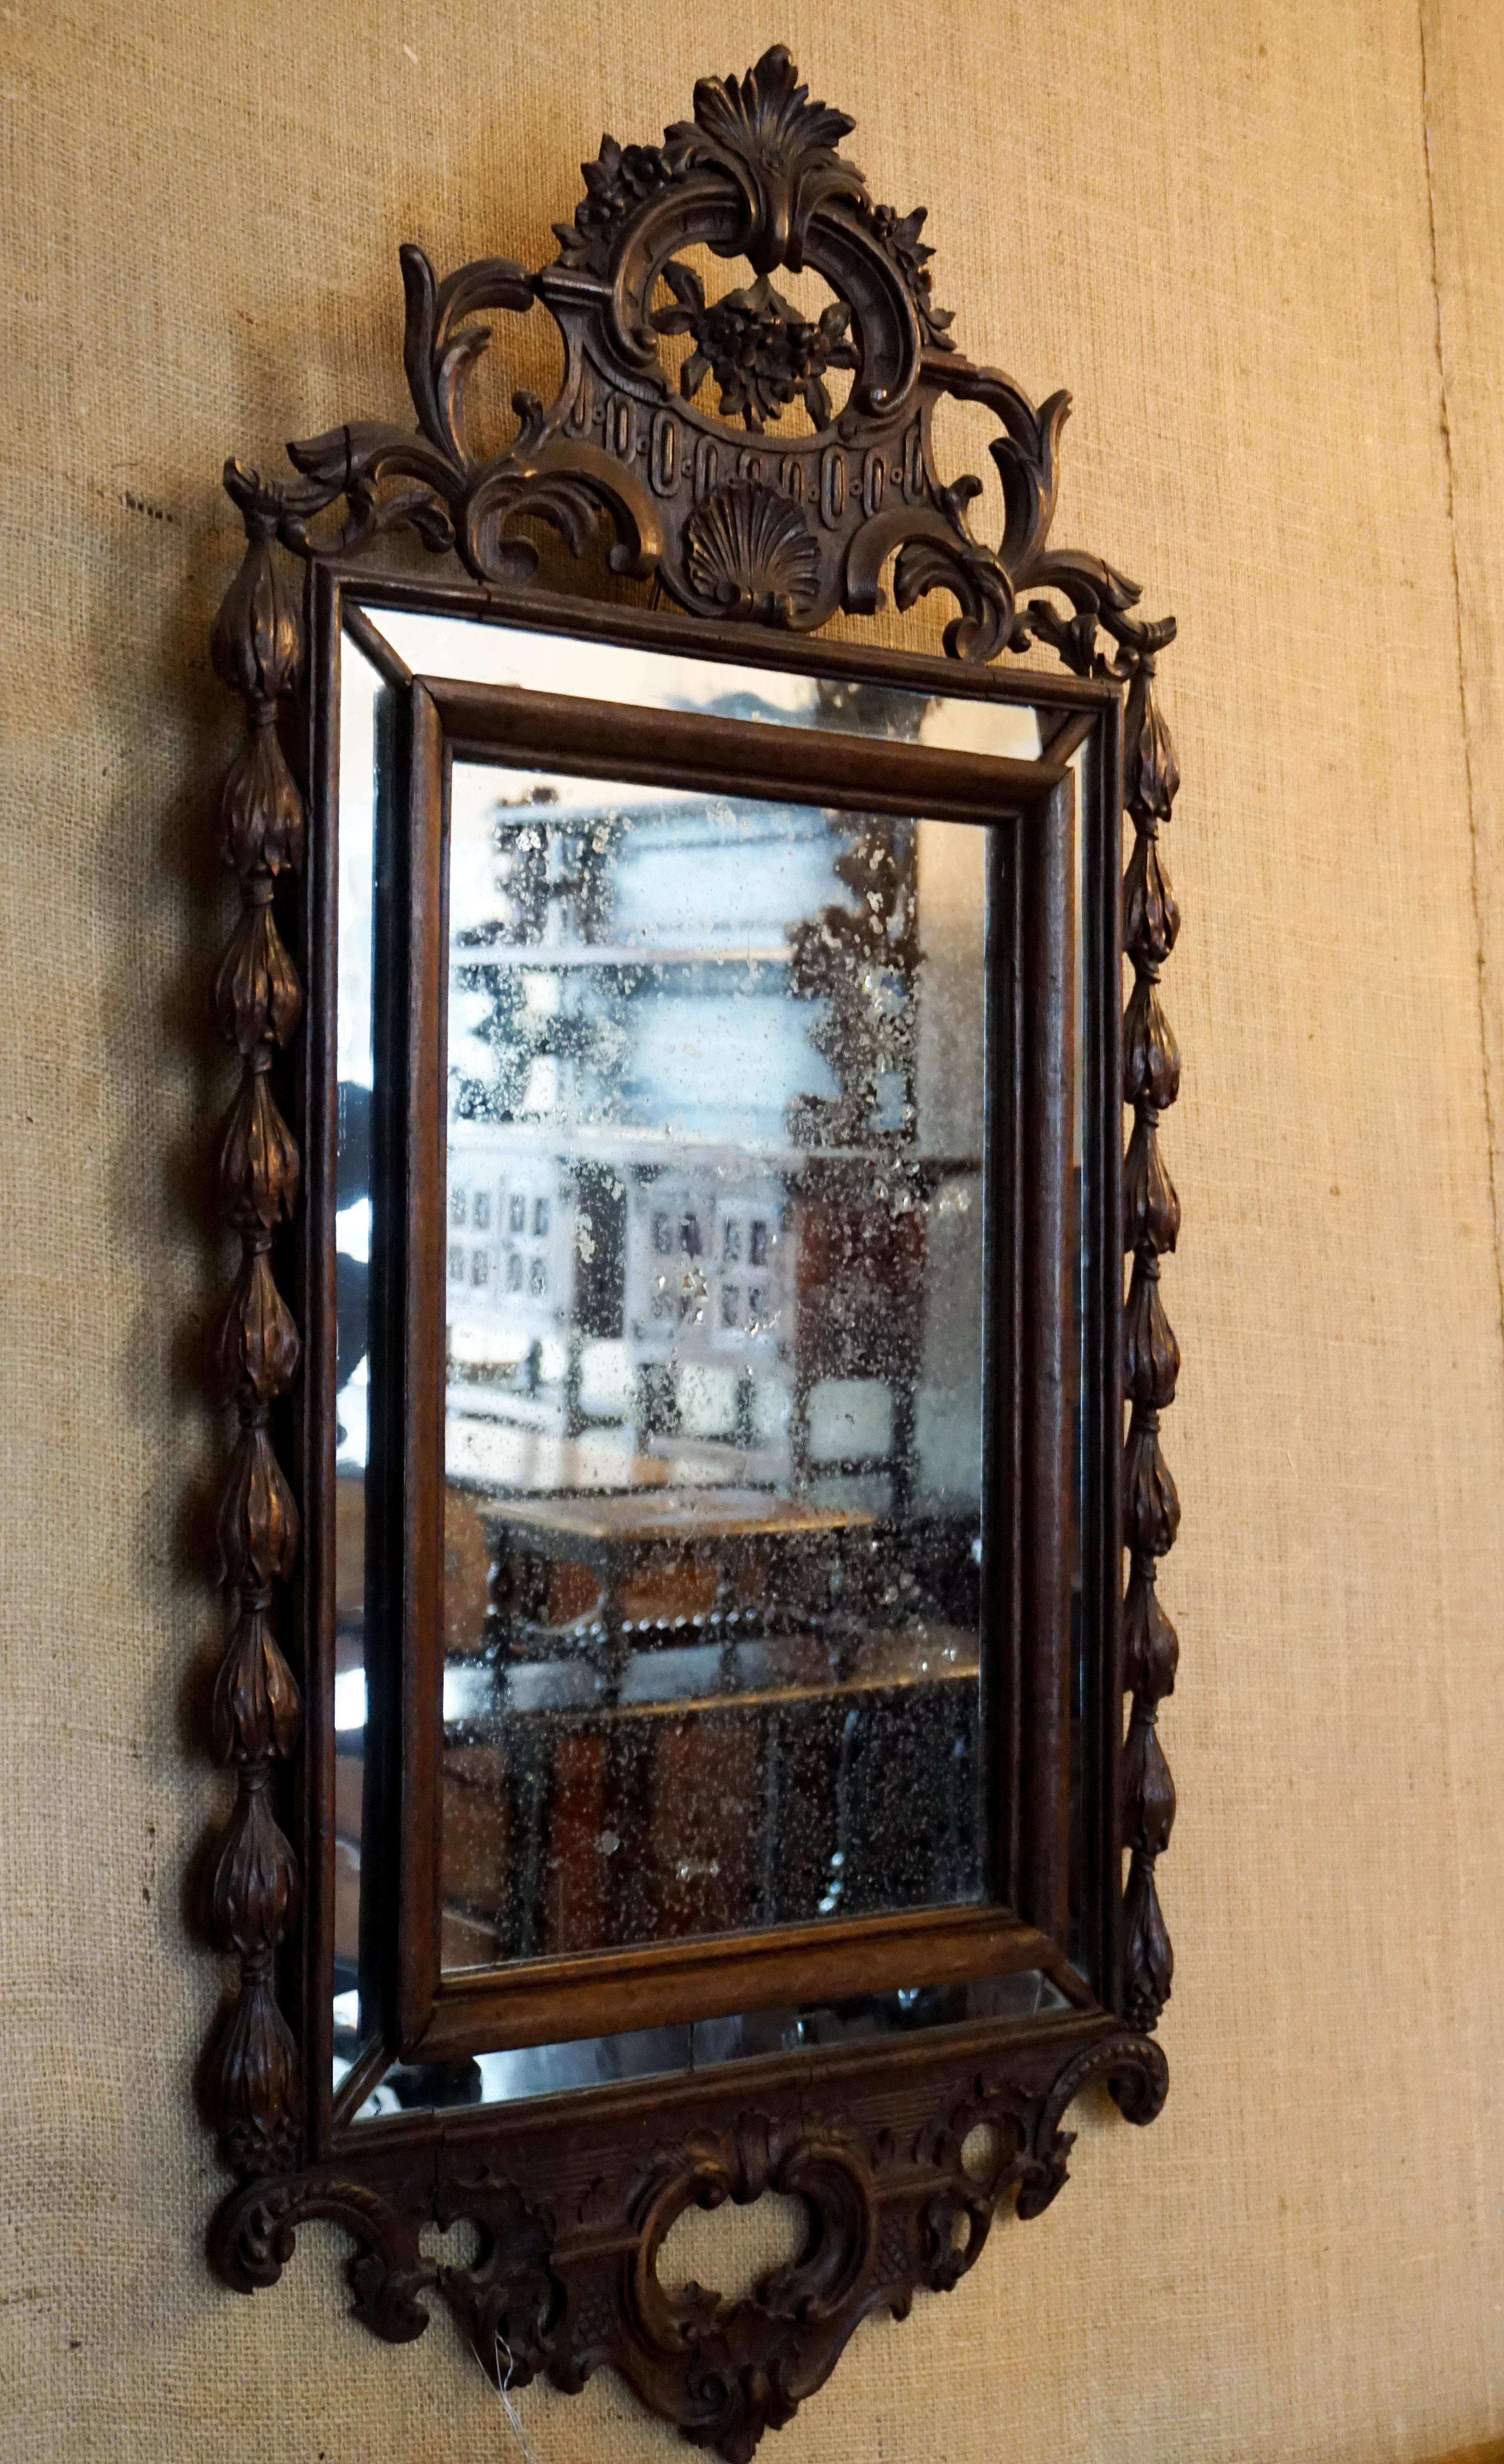 Here we have a mid-sized, wooden, French mirror with intricate carvings featuring a centre shell with lovely floral designs and beaded designs on the sides. 

Origin: France circa 1750

Measurements:
1